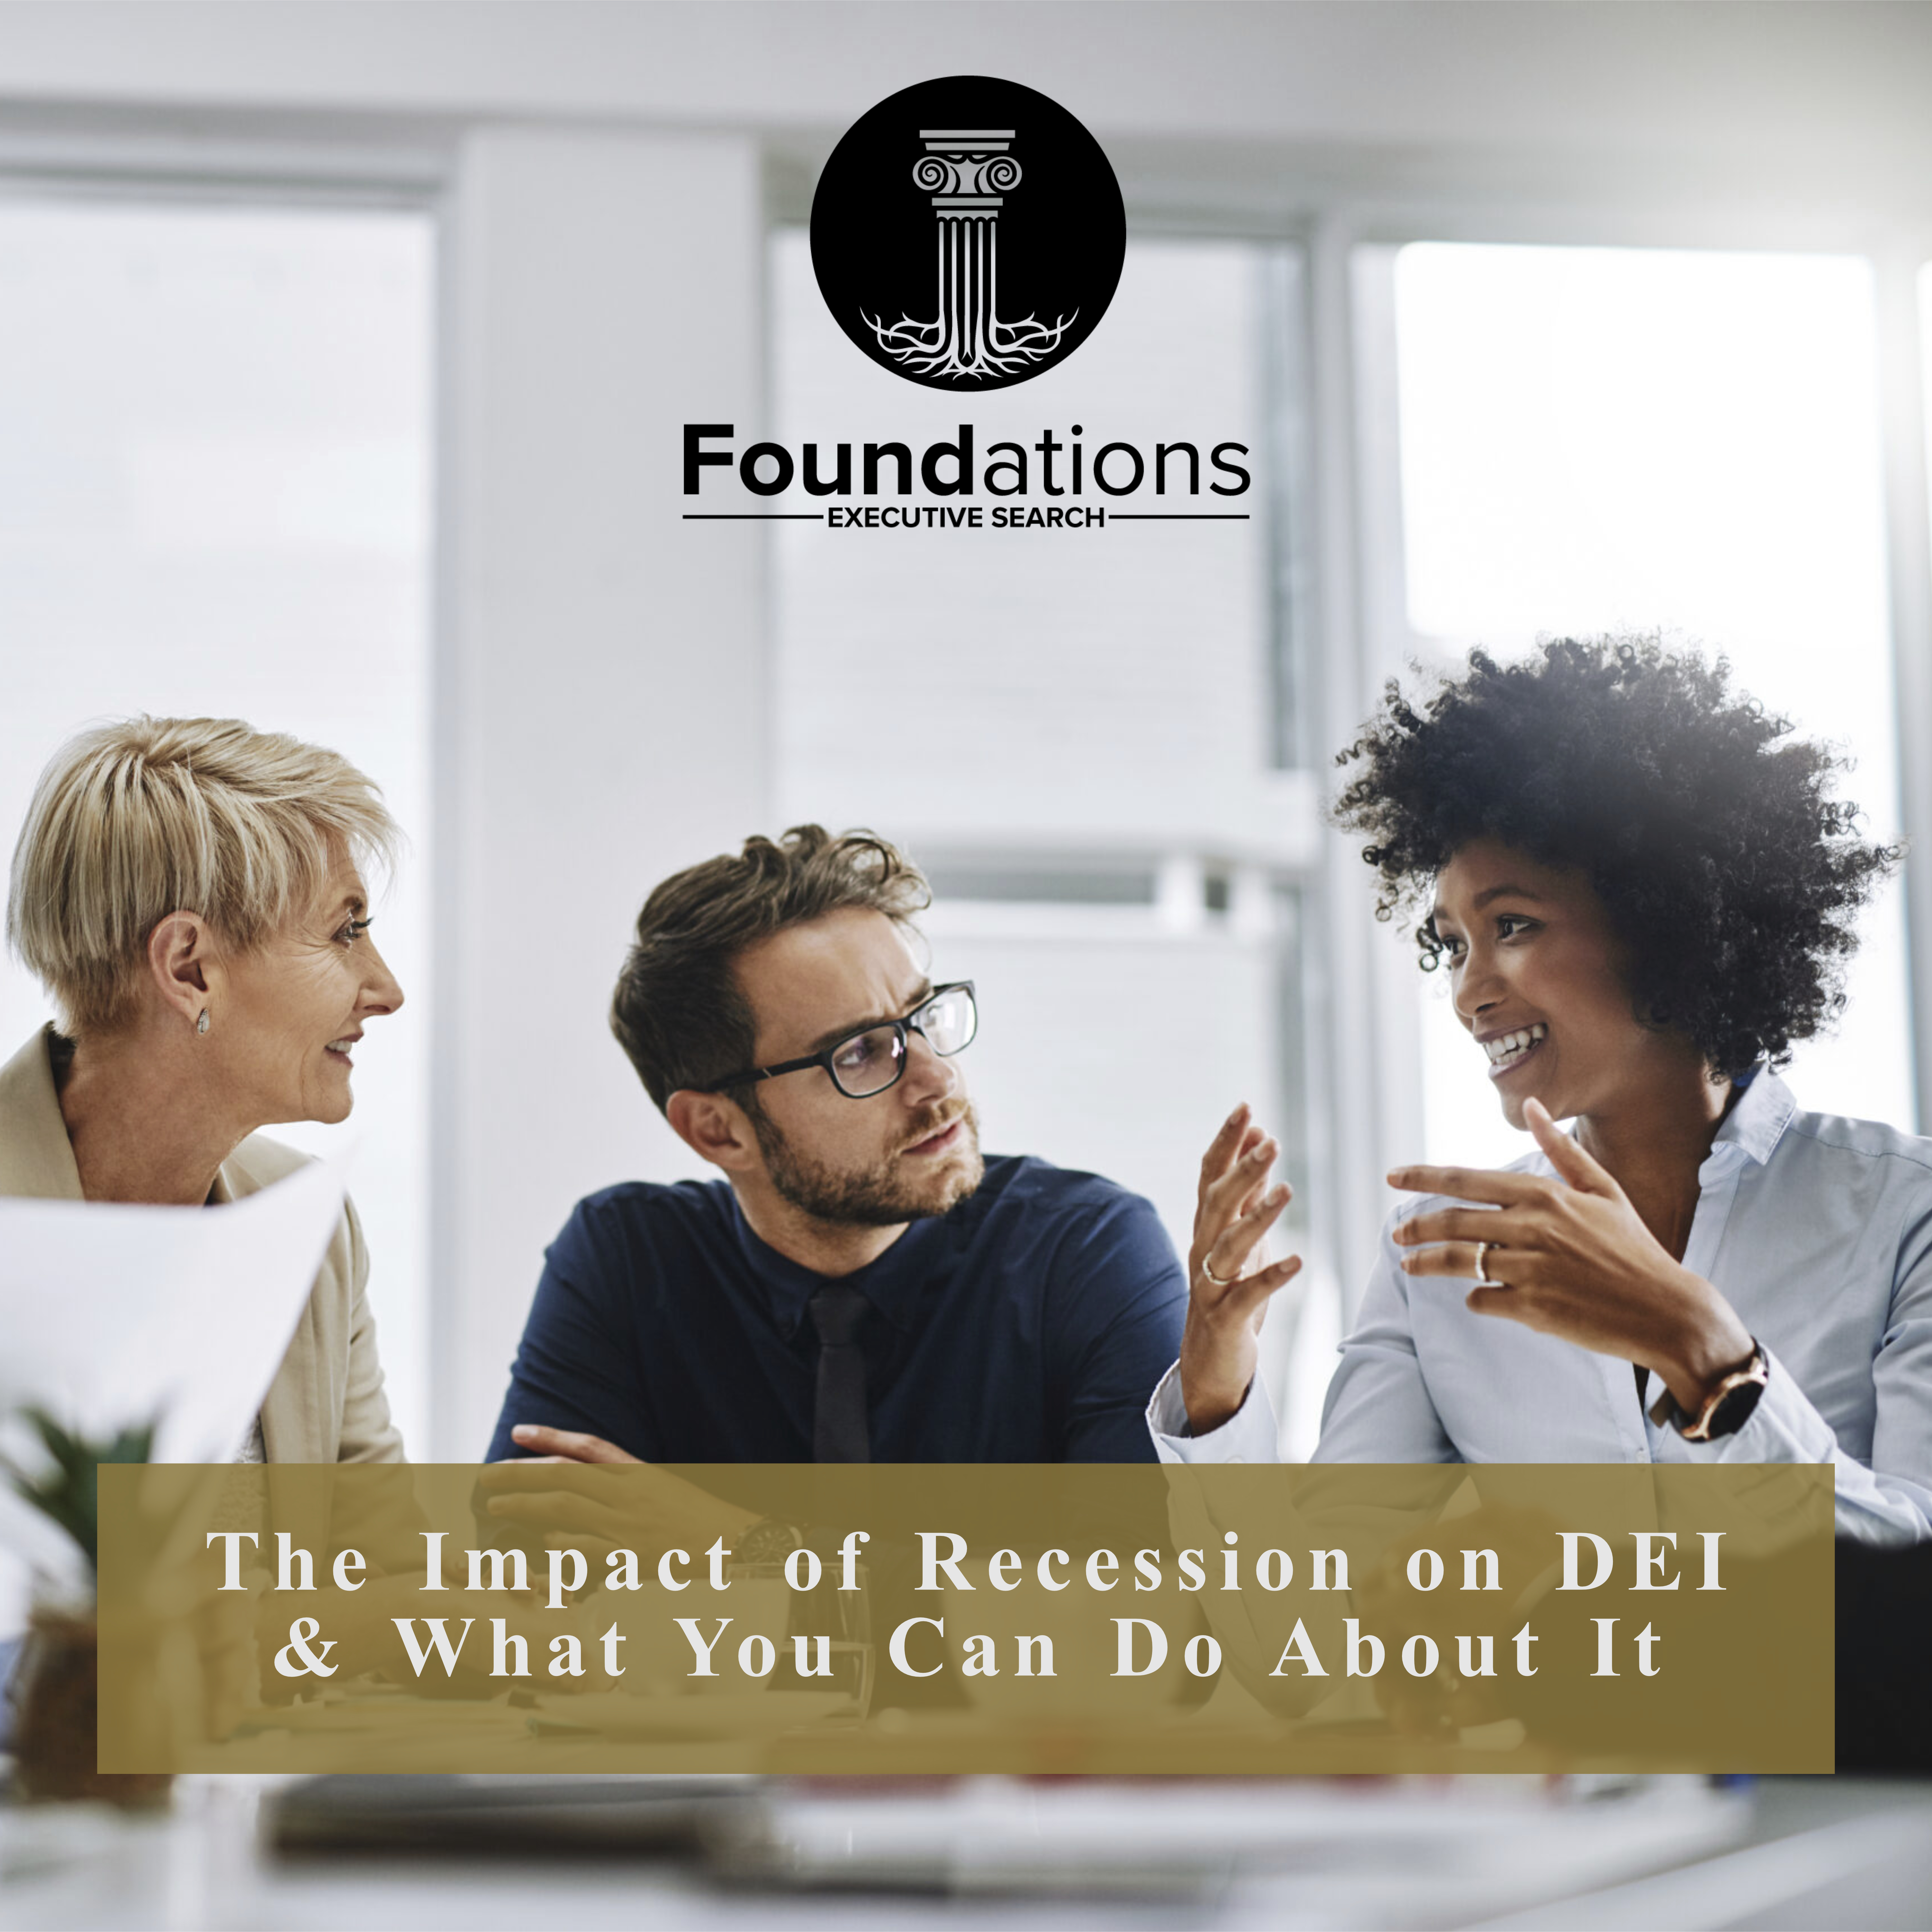 The Impact of Recession on DEI & What You Can Do About It